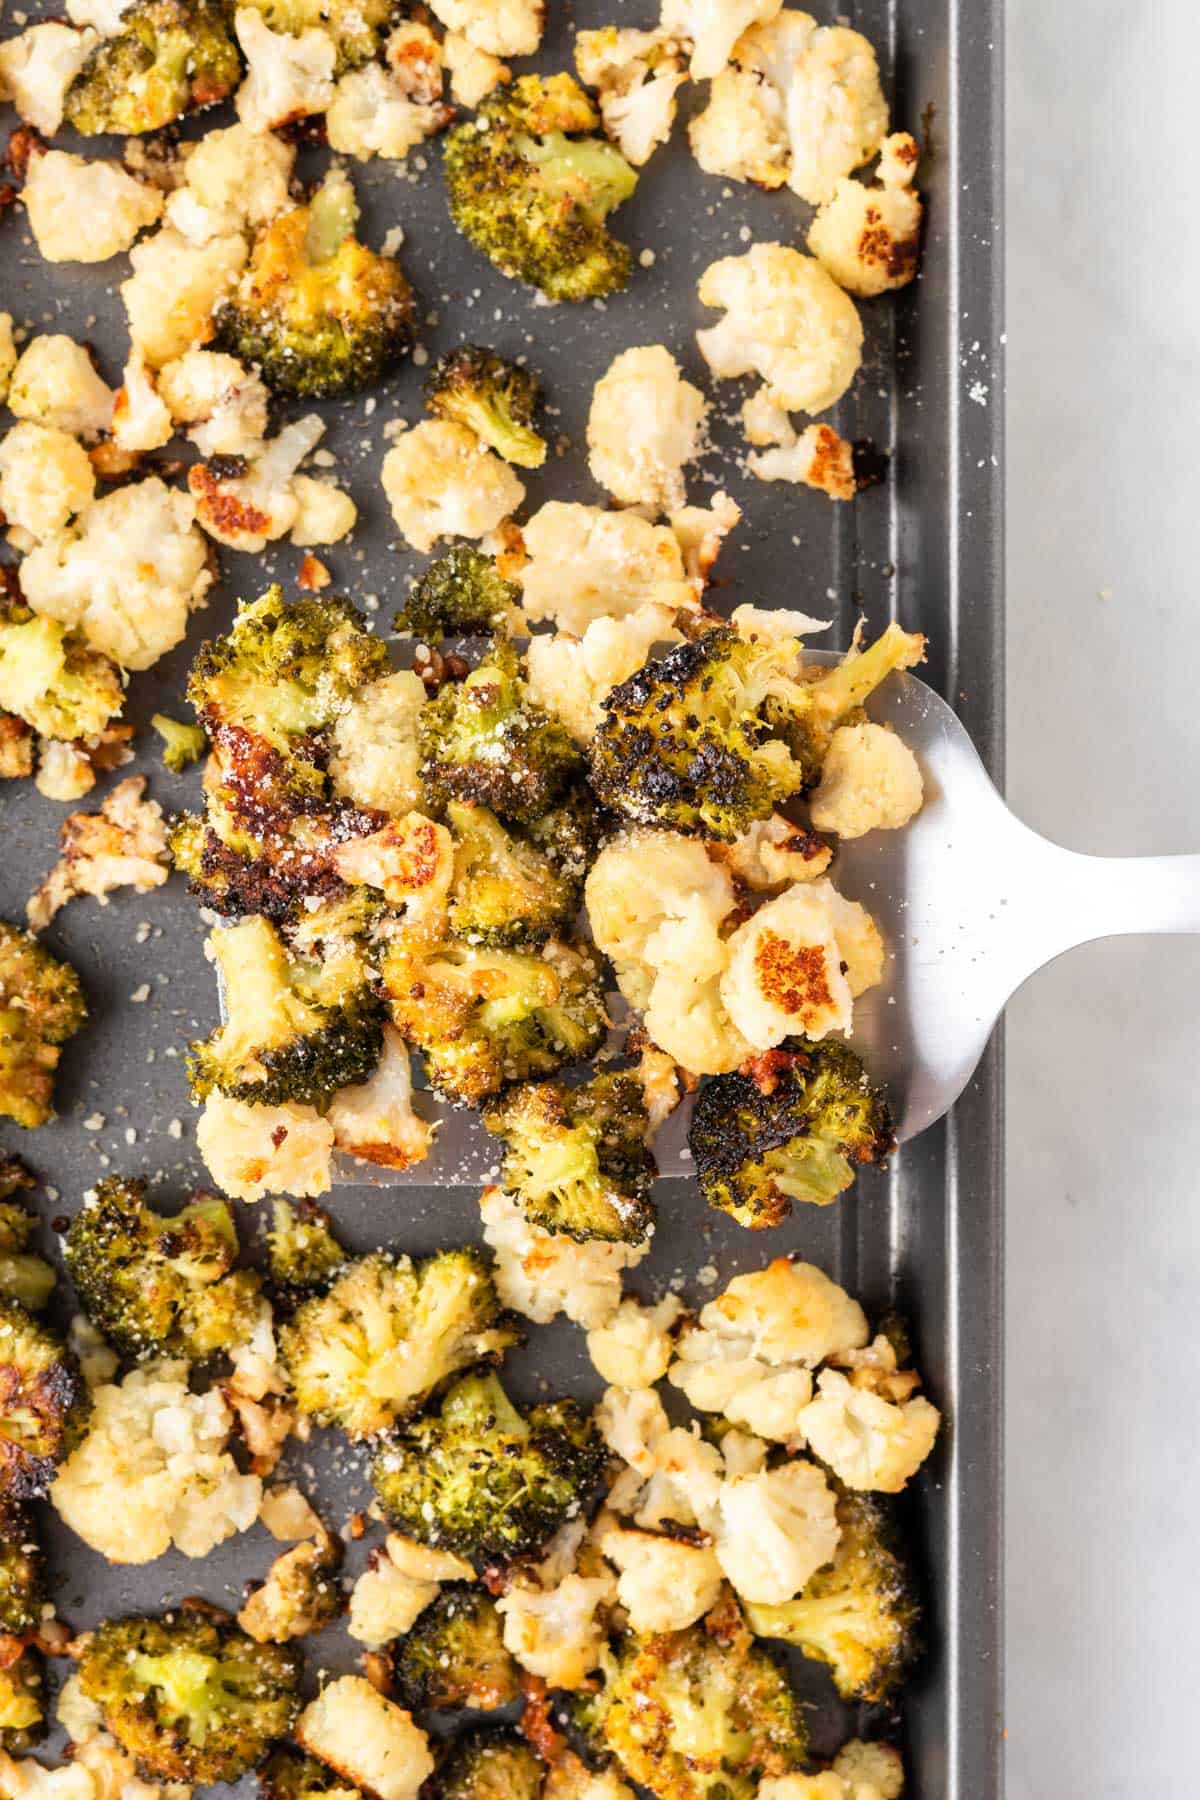 spatula taking roasted broccoli and cauliflower from the pan